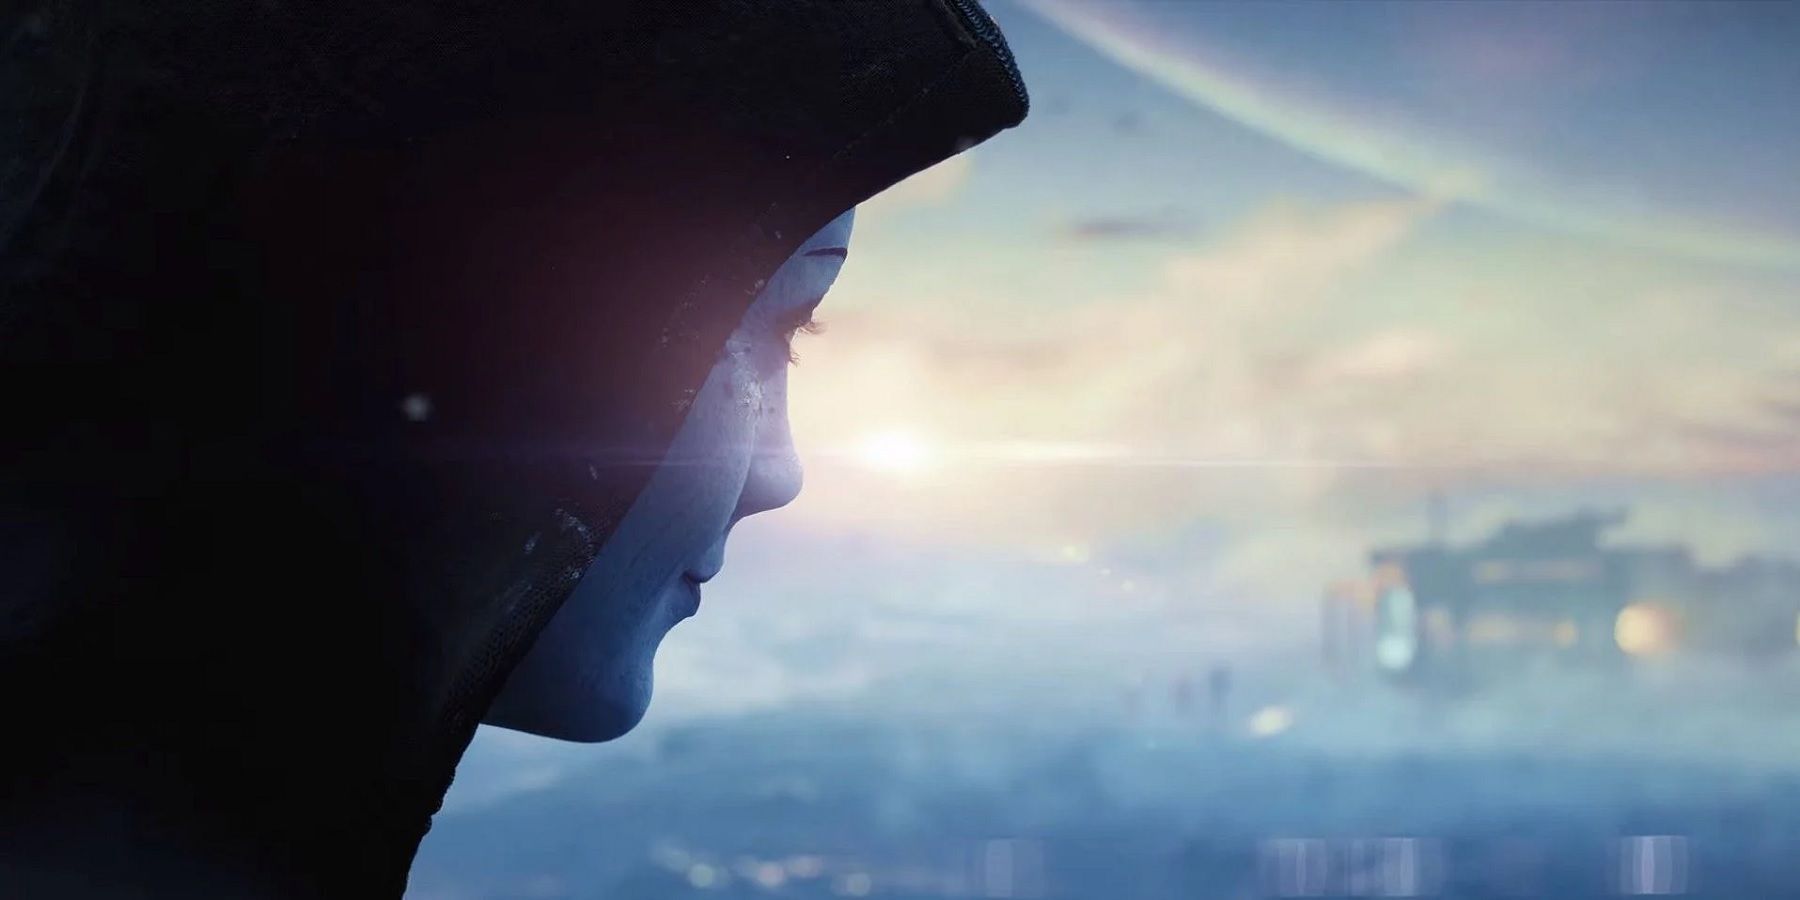 Mass Effect 4 Teaser Hints at New Role for Liara